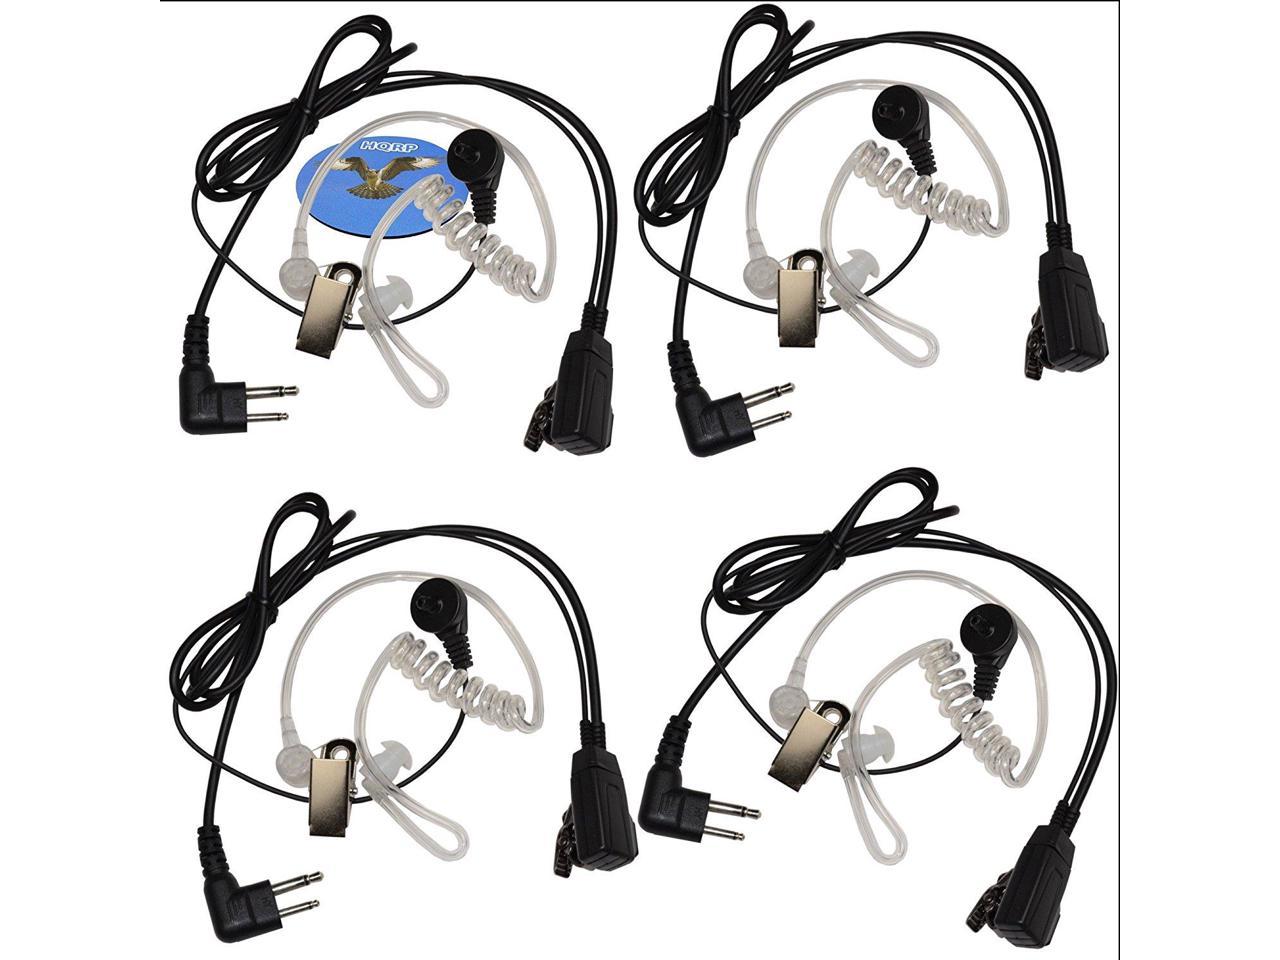 HQRP 4-Pack Hands Free 2-Pin HeadSet with Earpiece and Microphone for Motorola Radio Devices DEP450 / DTR610 / DTR620 / EP450S / GP68 / GP88 / GP88S / GP300 / GP308 / GP350 / GP2000 + HQRP Coaster